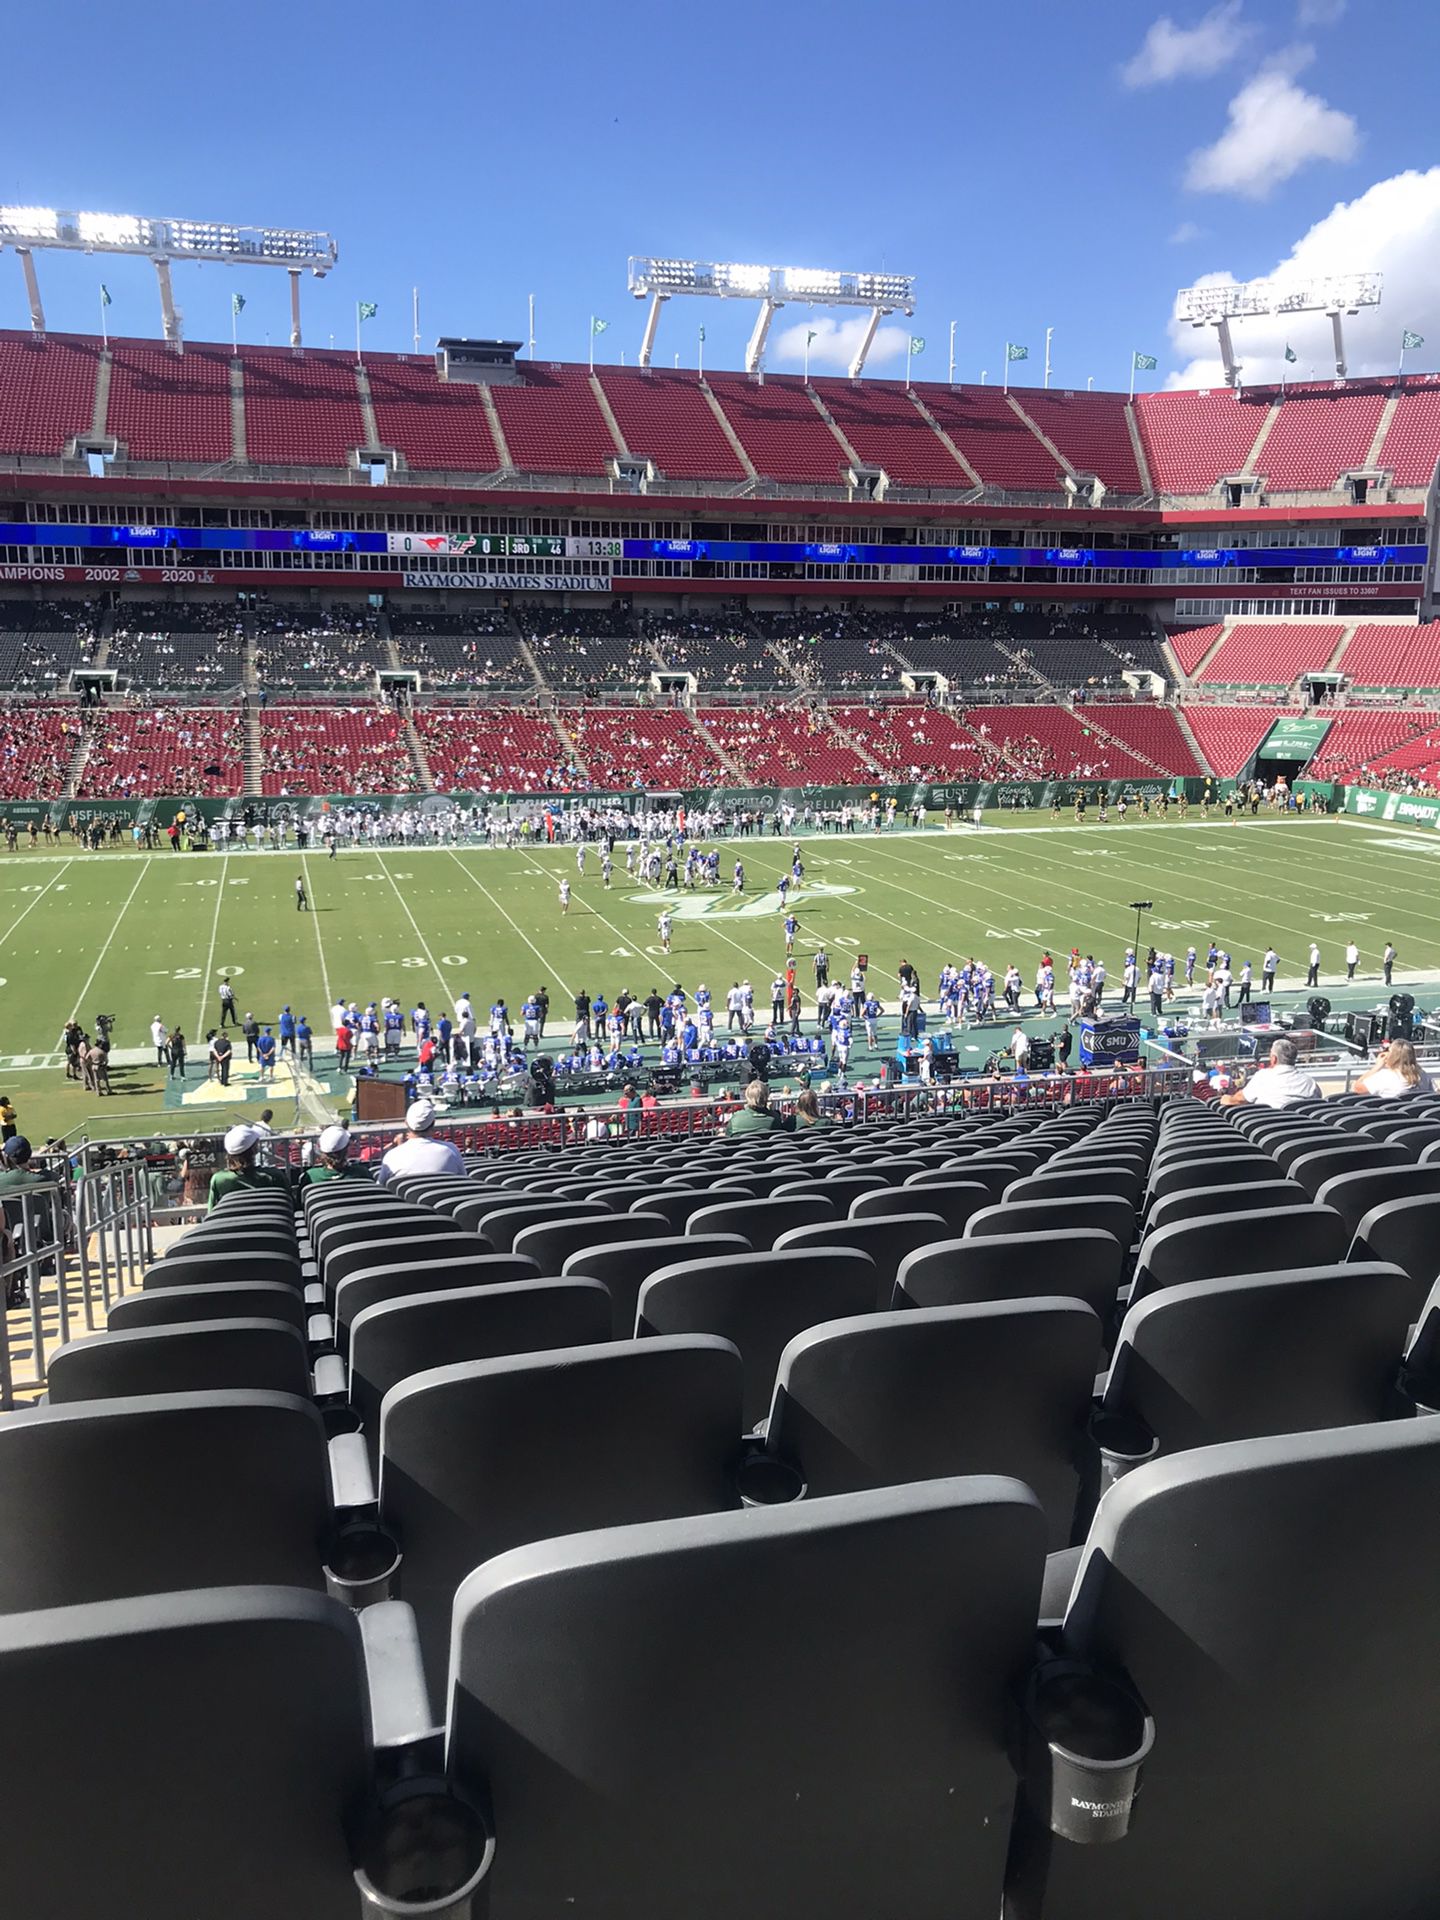 Needed 1 Ticket For Usf Vs Ucf Football Game